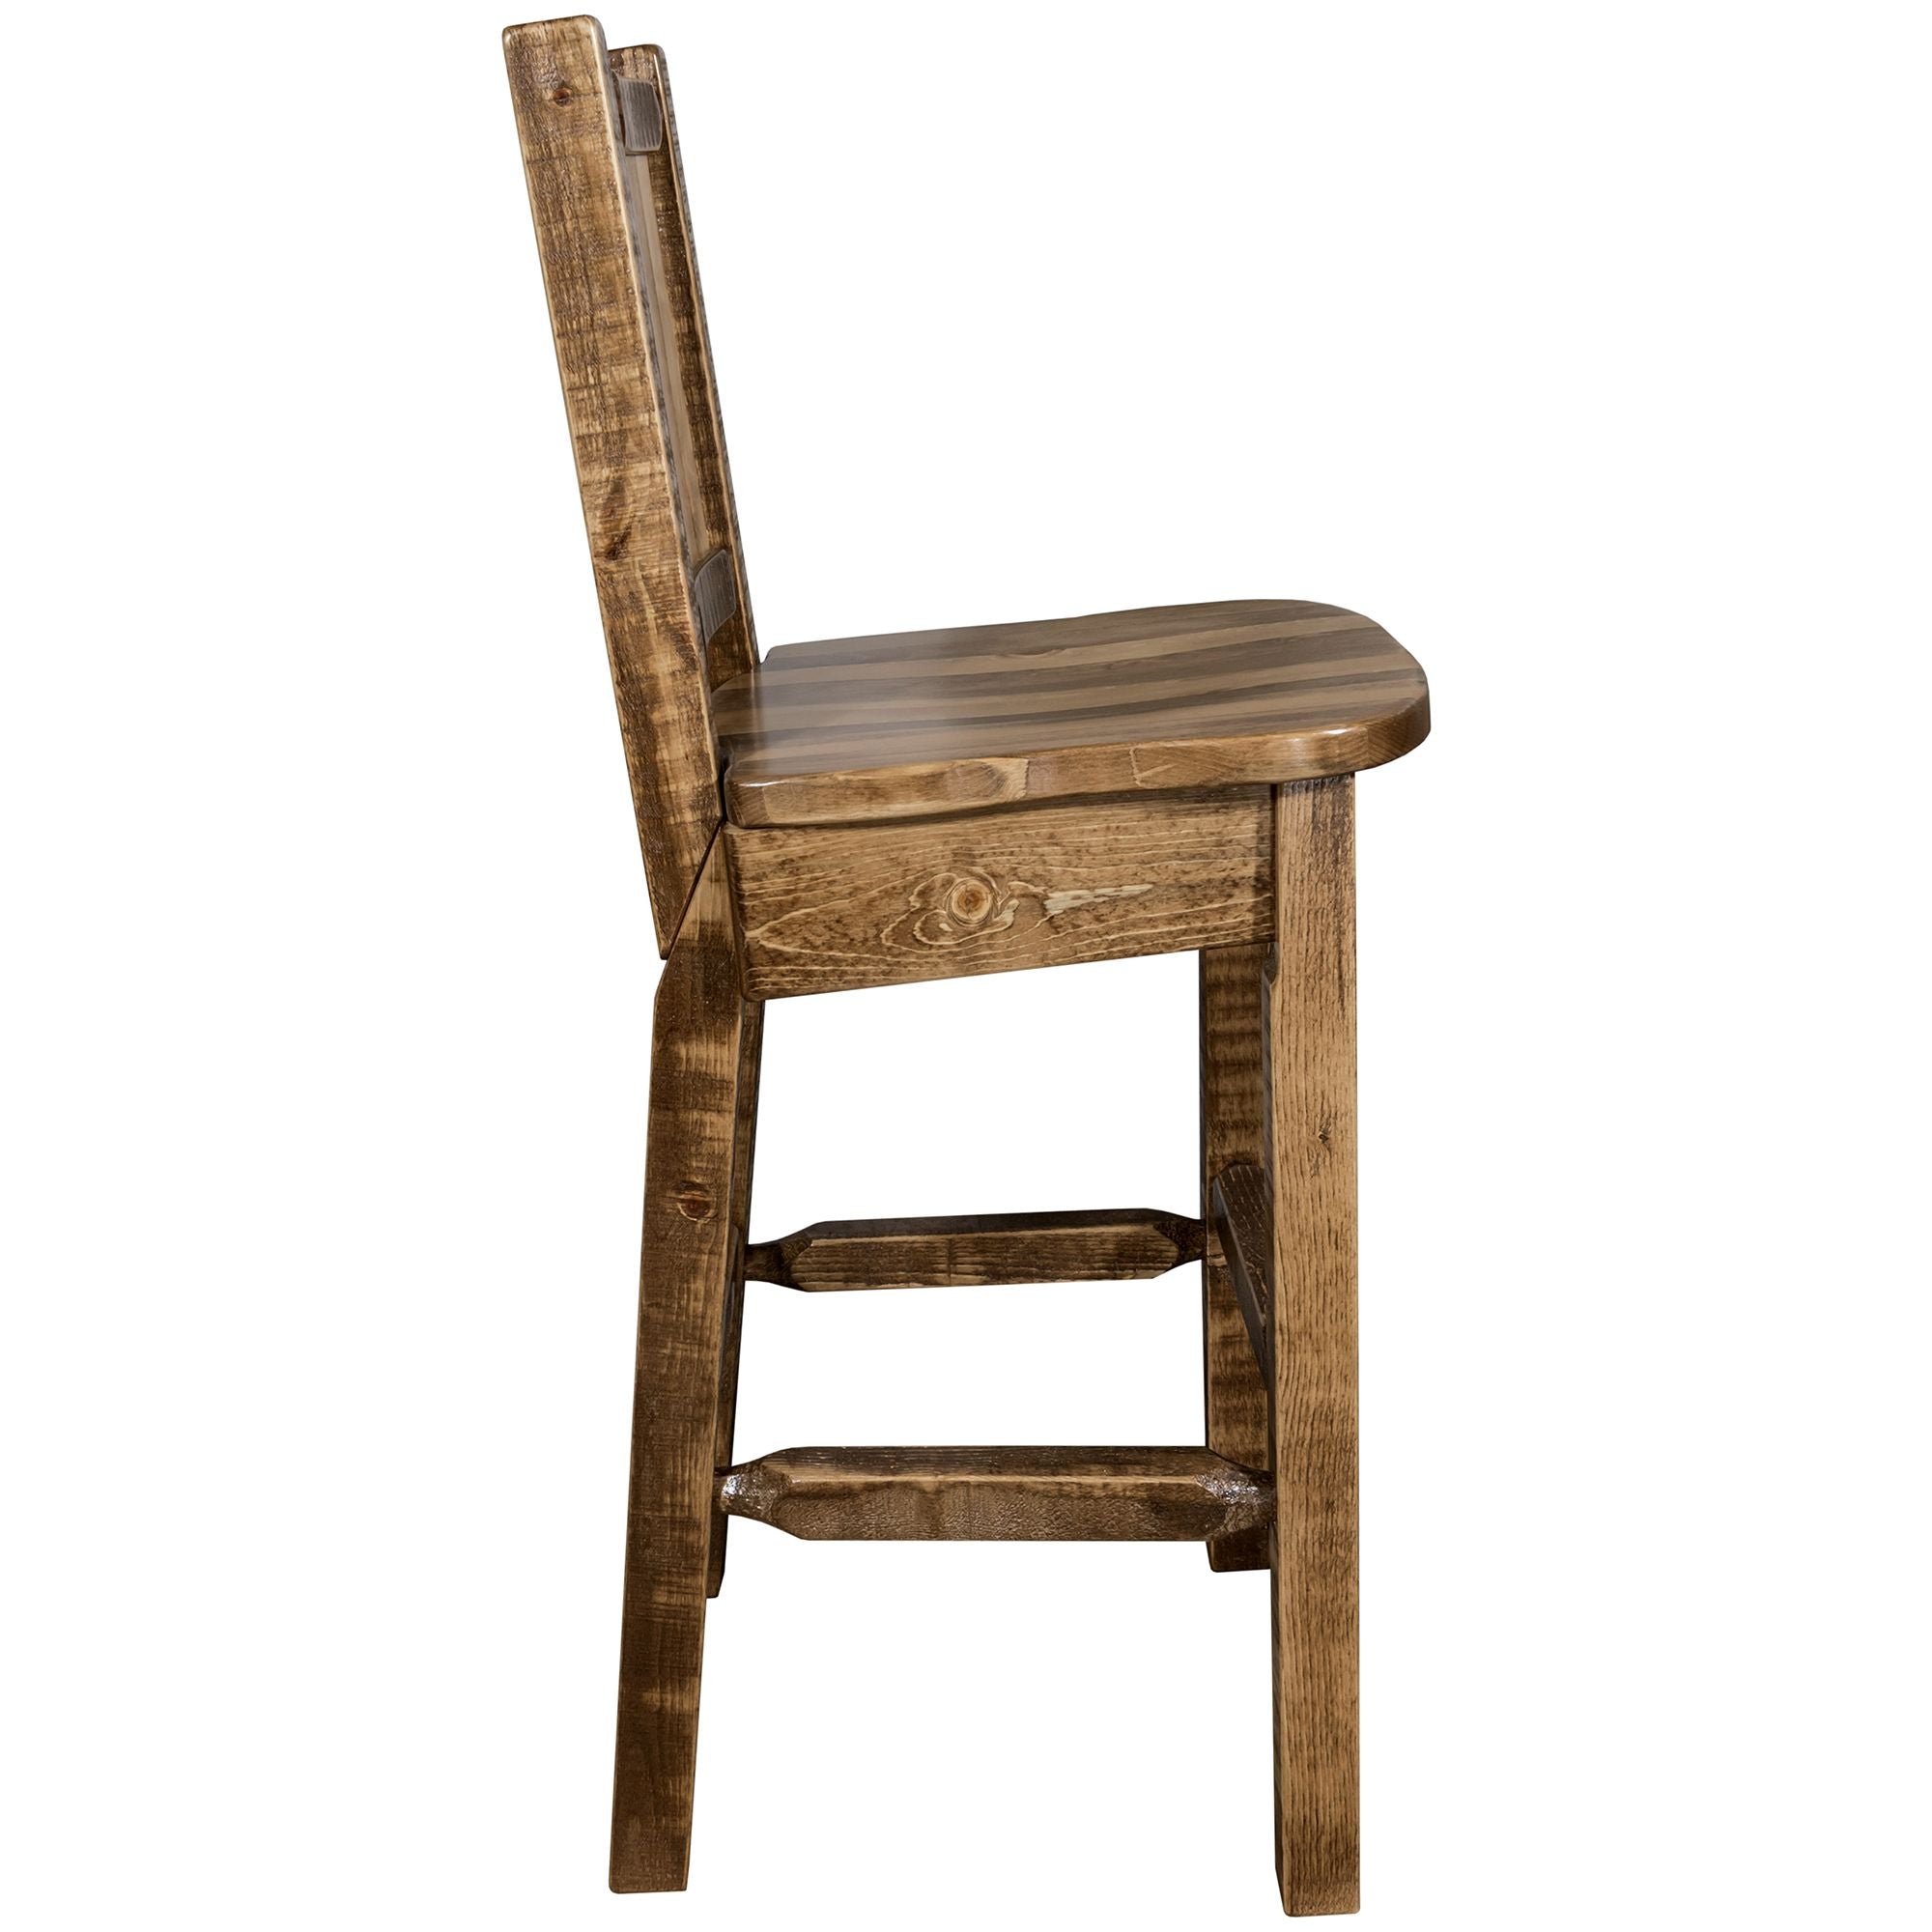 Montana Homestead MWHCBSWNRSLLZ Barstool With Back and Laser Engraved Design Stain Lacquer Finish Side